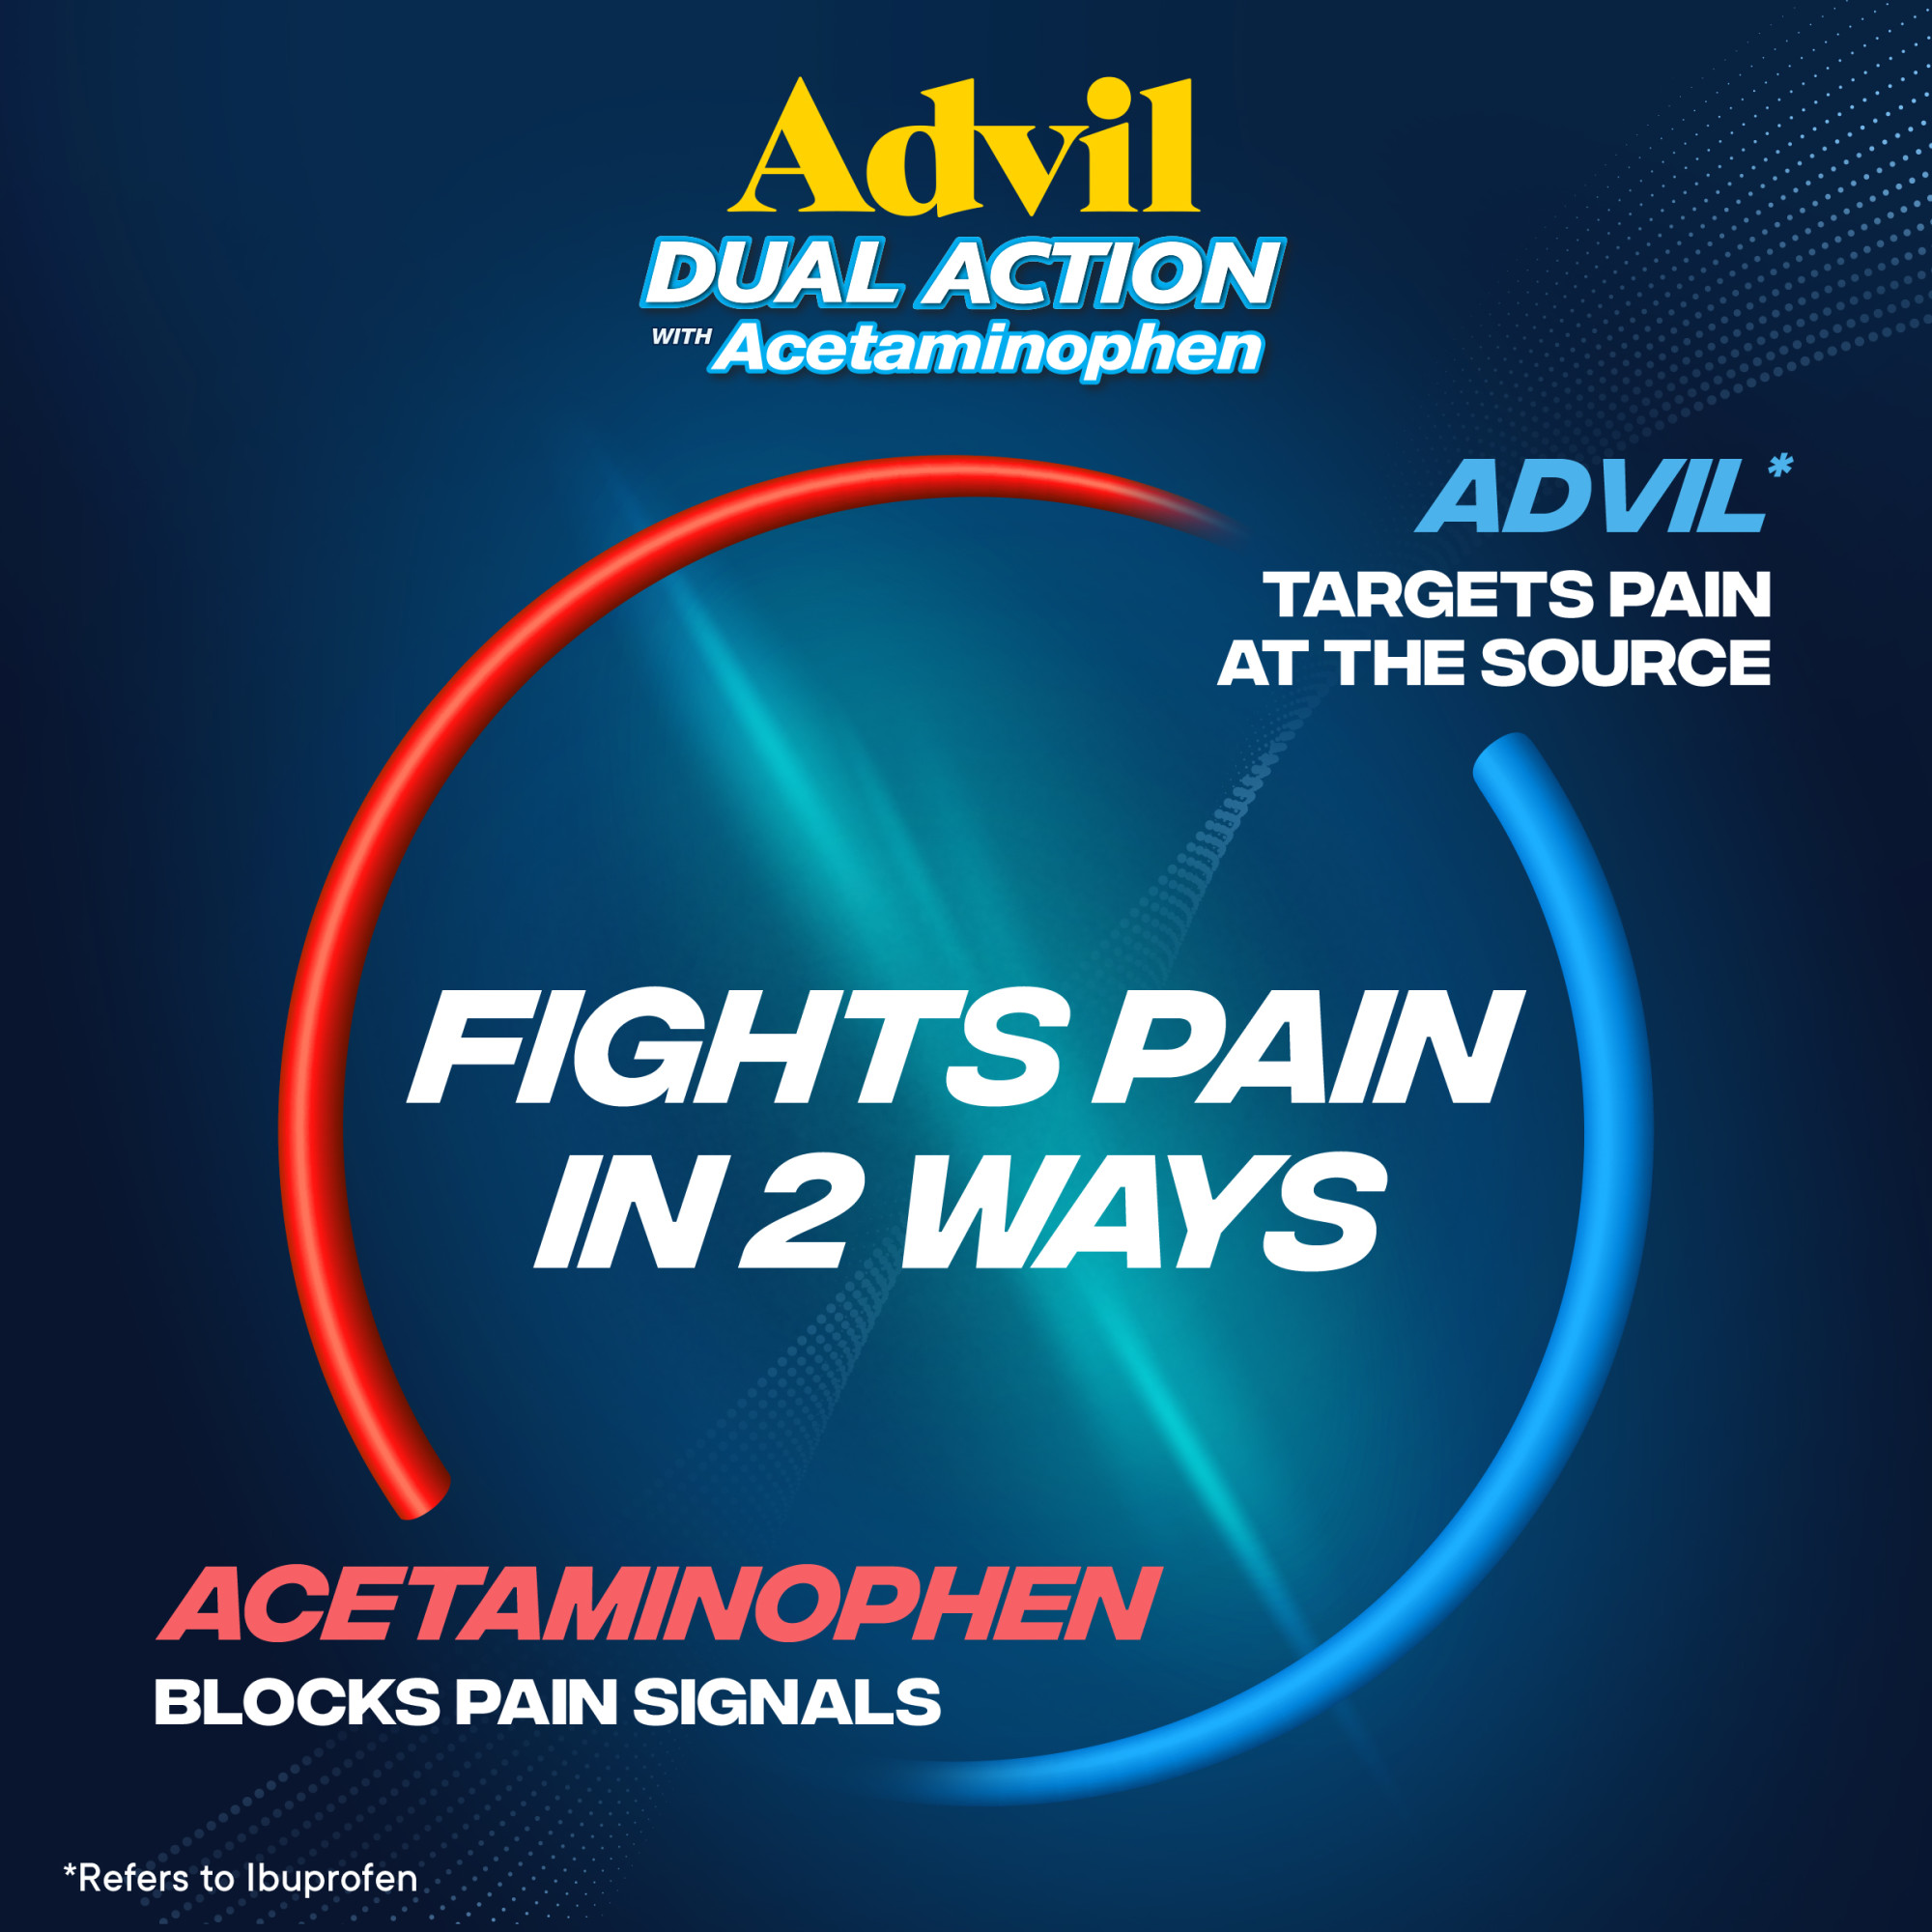 Advil Dual Action Pain Relievers Coated Caplets, 125Mg Ibuprofen and 250Mg Acetaminophen, 36 Count - image 2 of 10